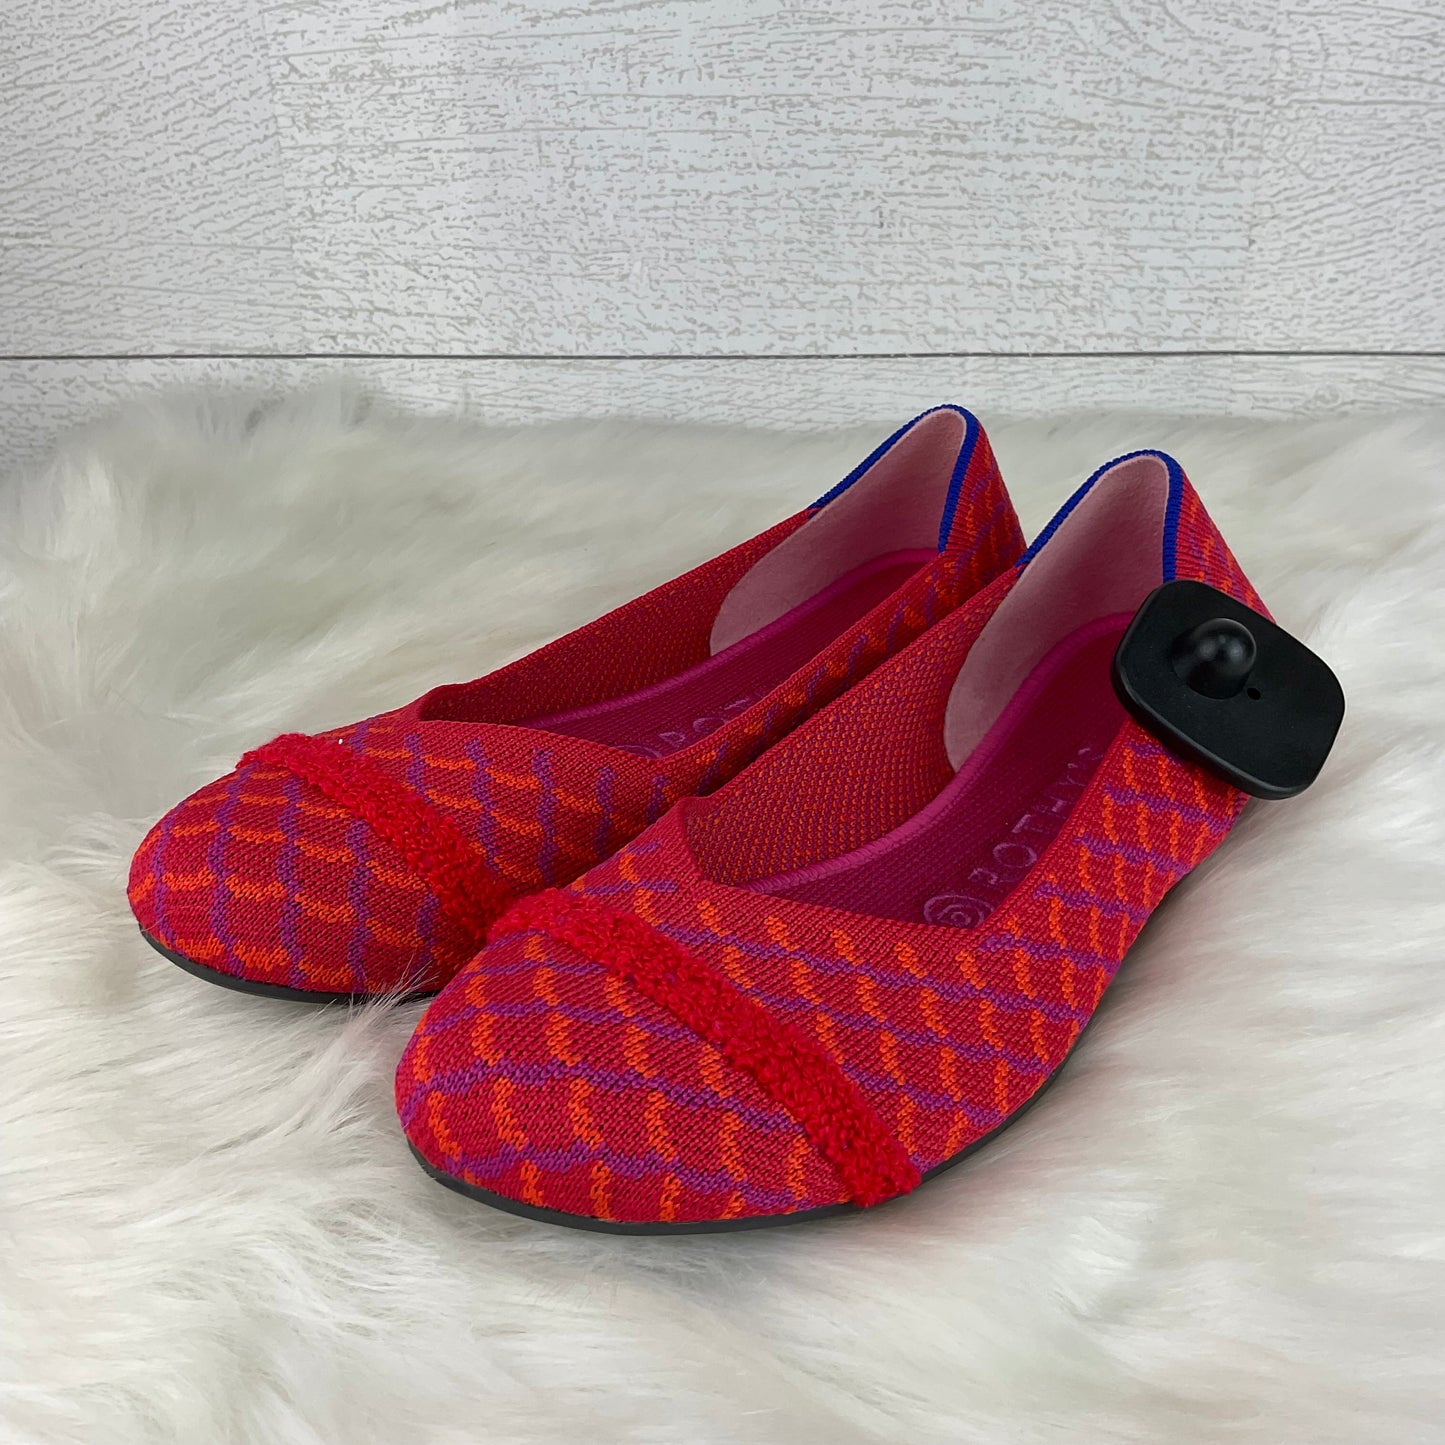 Red Shoes Flats Rothys, Size 7.5